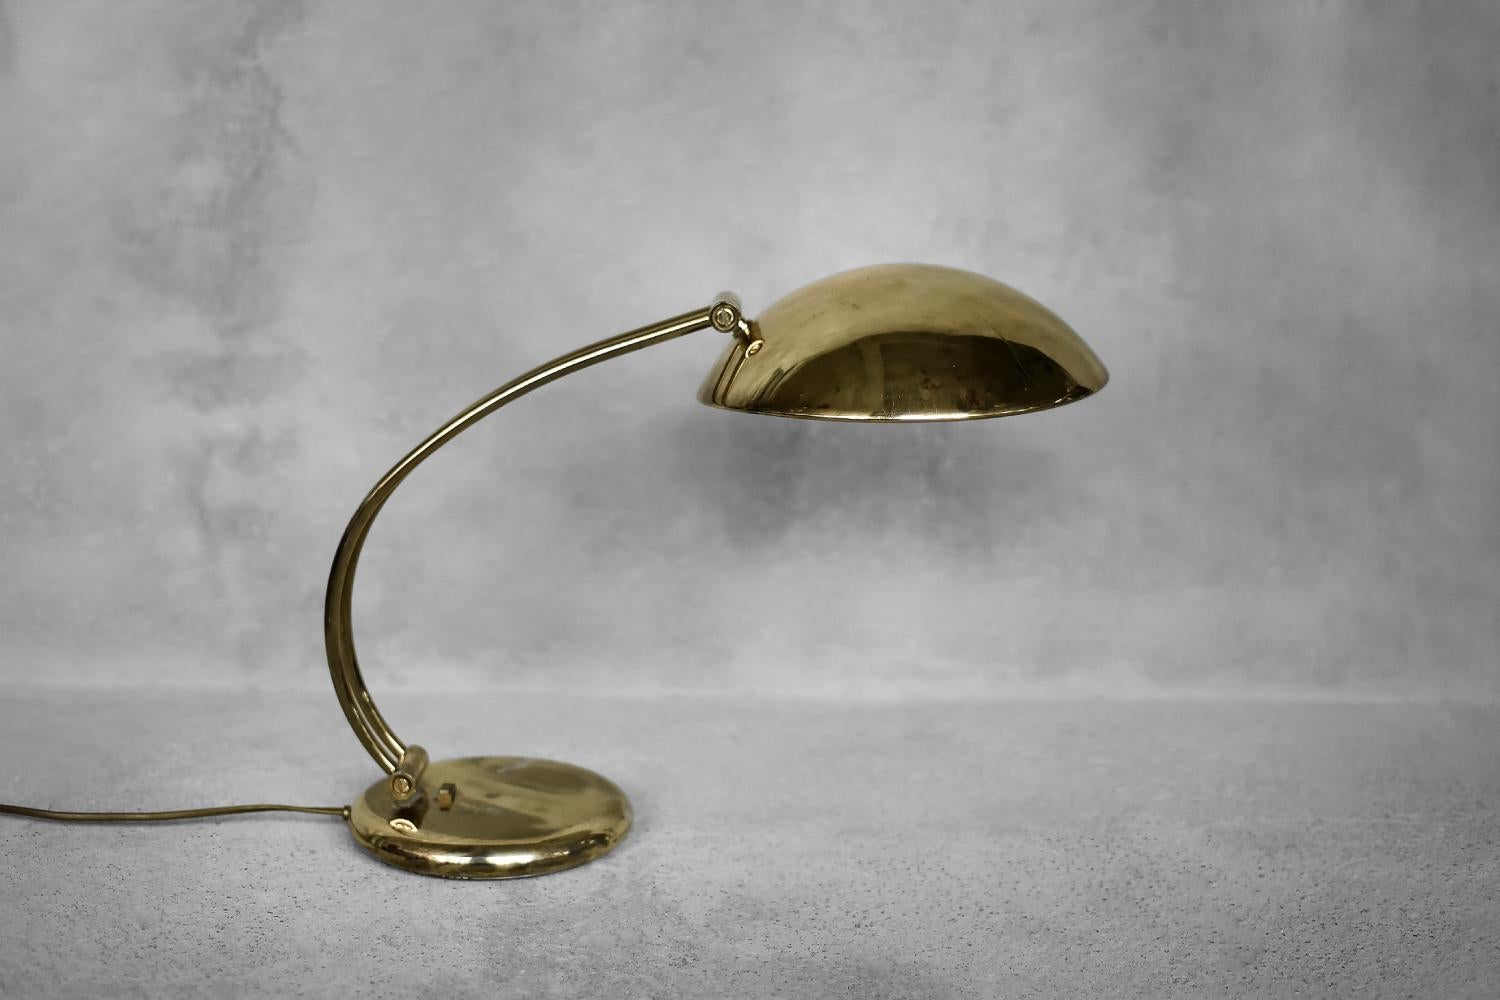 This elegant, gold desk lamp was produced by the Belgian manufacturer Massive during the 1970s. The round base is combined with a large, cylindrical lampshade attached to an articulated arm. The arm and shade can be adjusted to obtain a wide angle